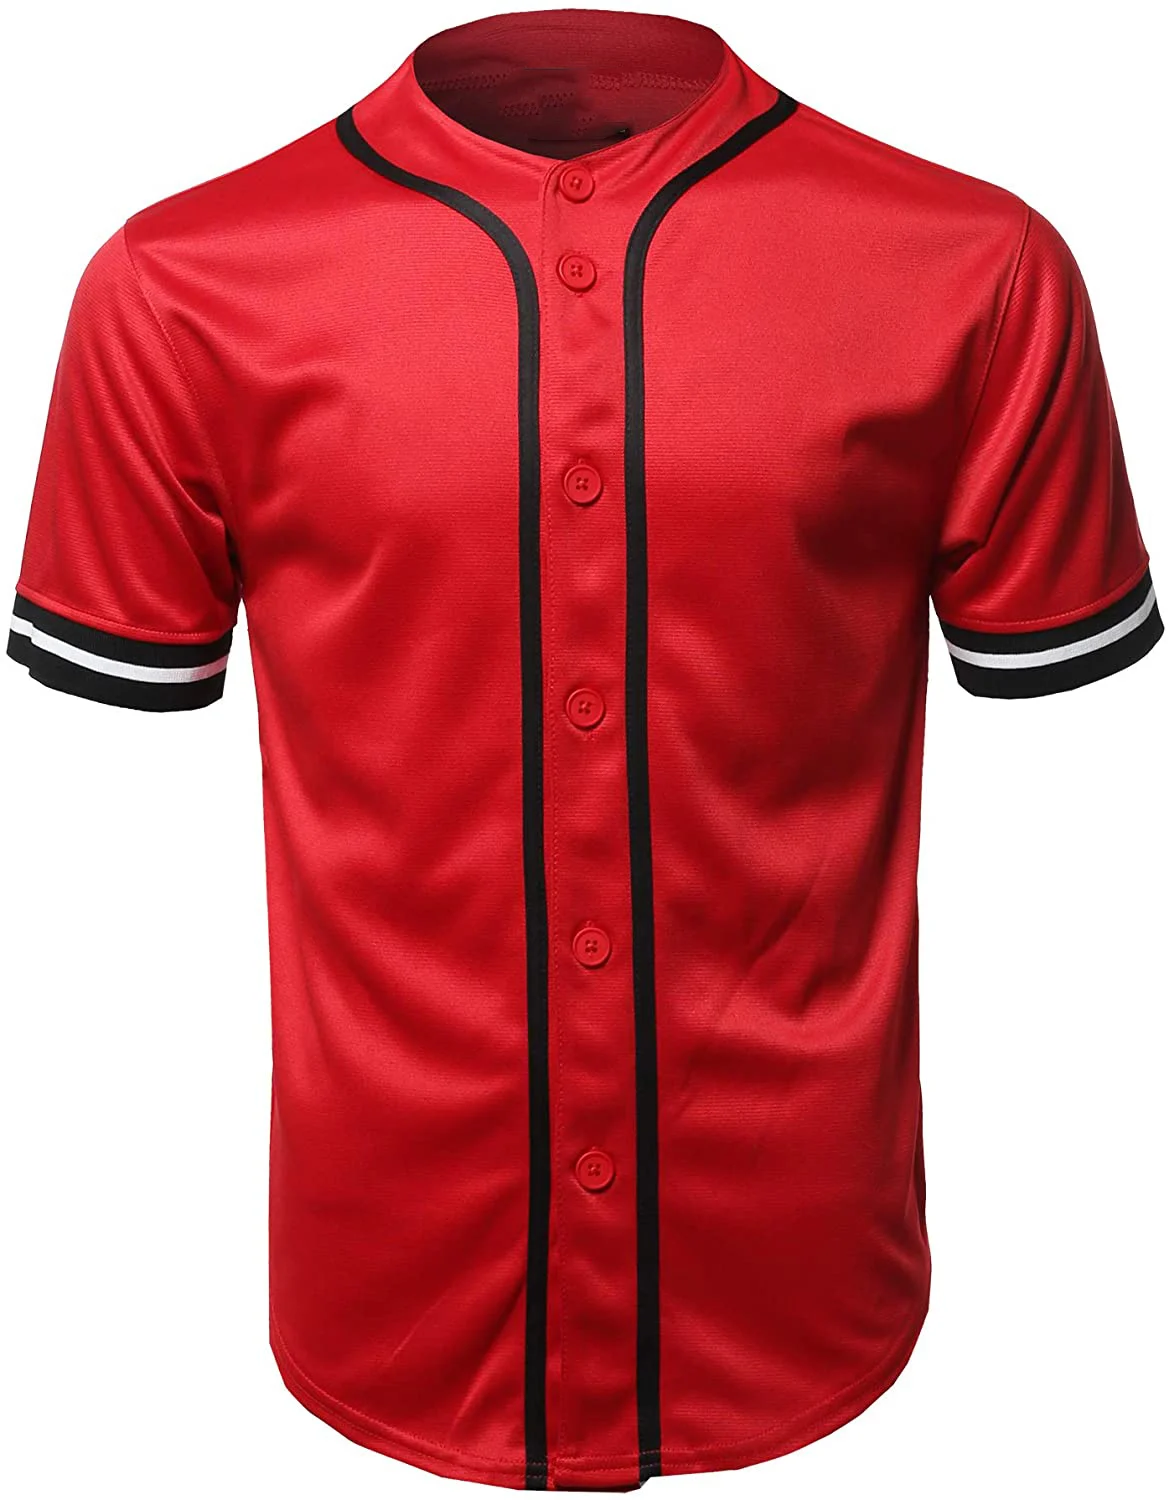 Sublimated Plain Red Full Button Custom Baseball Jerseys | YoungSpeeds